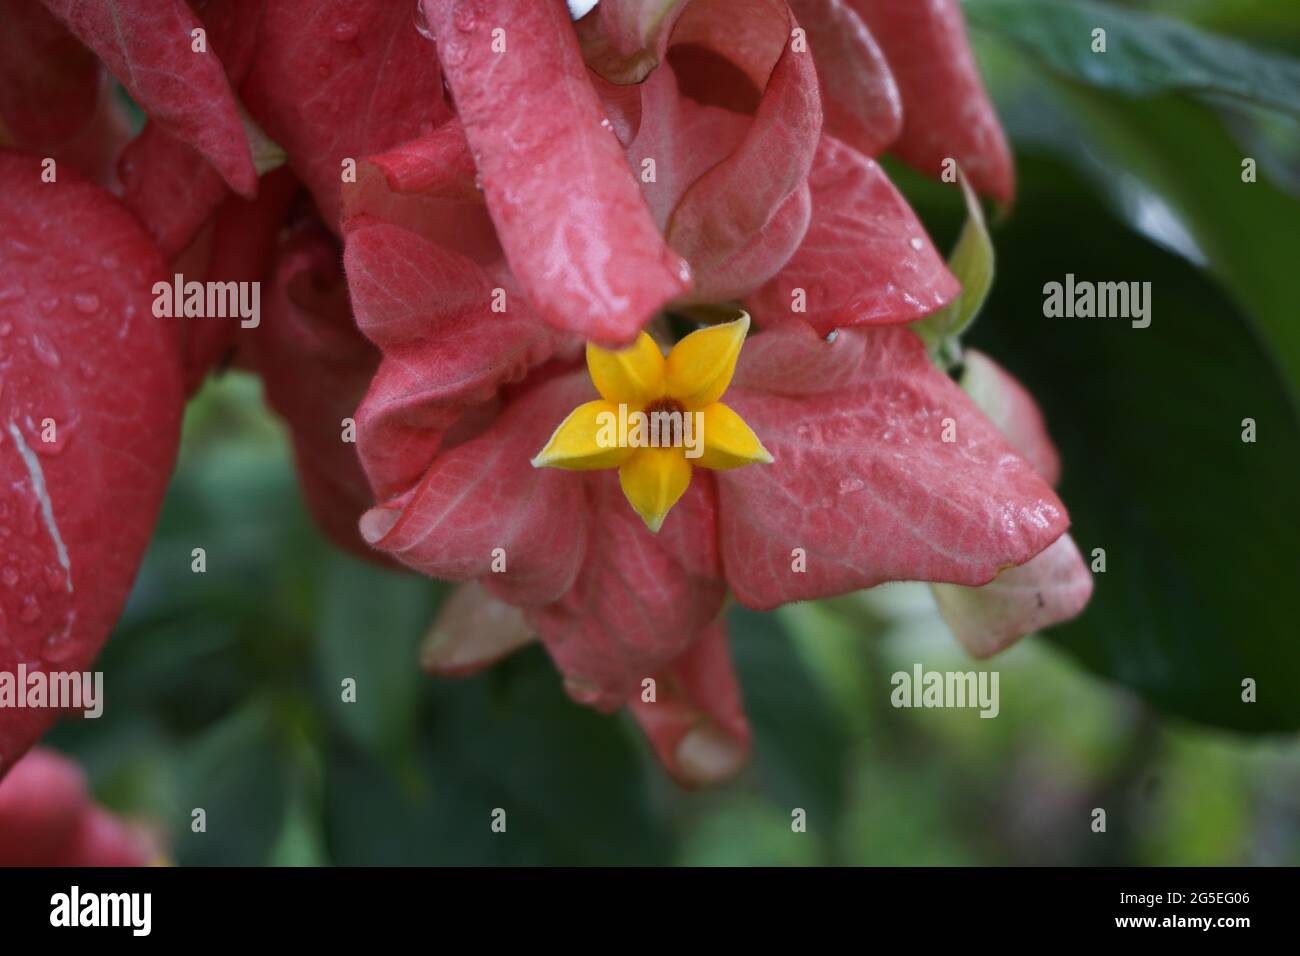 Mussaenda pubescens with a natural background. Also called Nusa Indah, Ashanti blood, Tropical dogwood Stock Photo